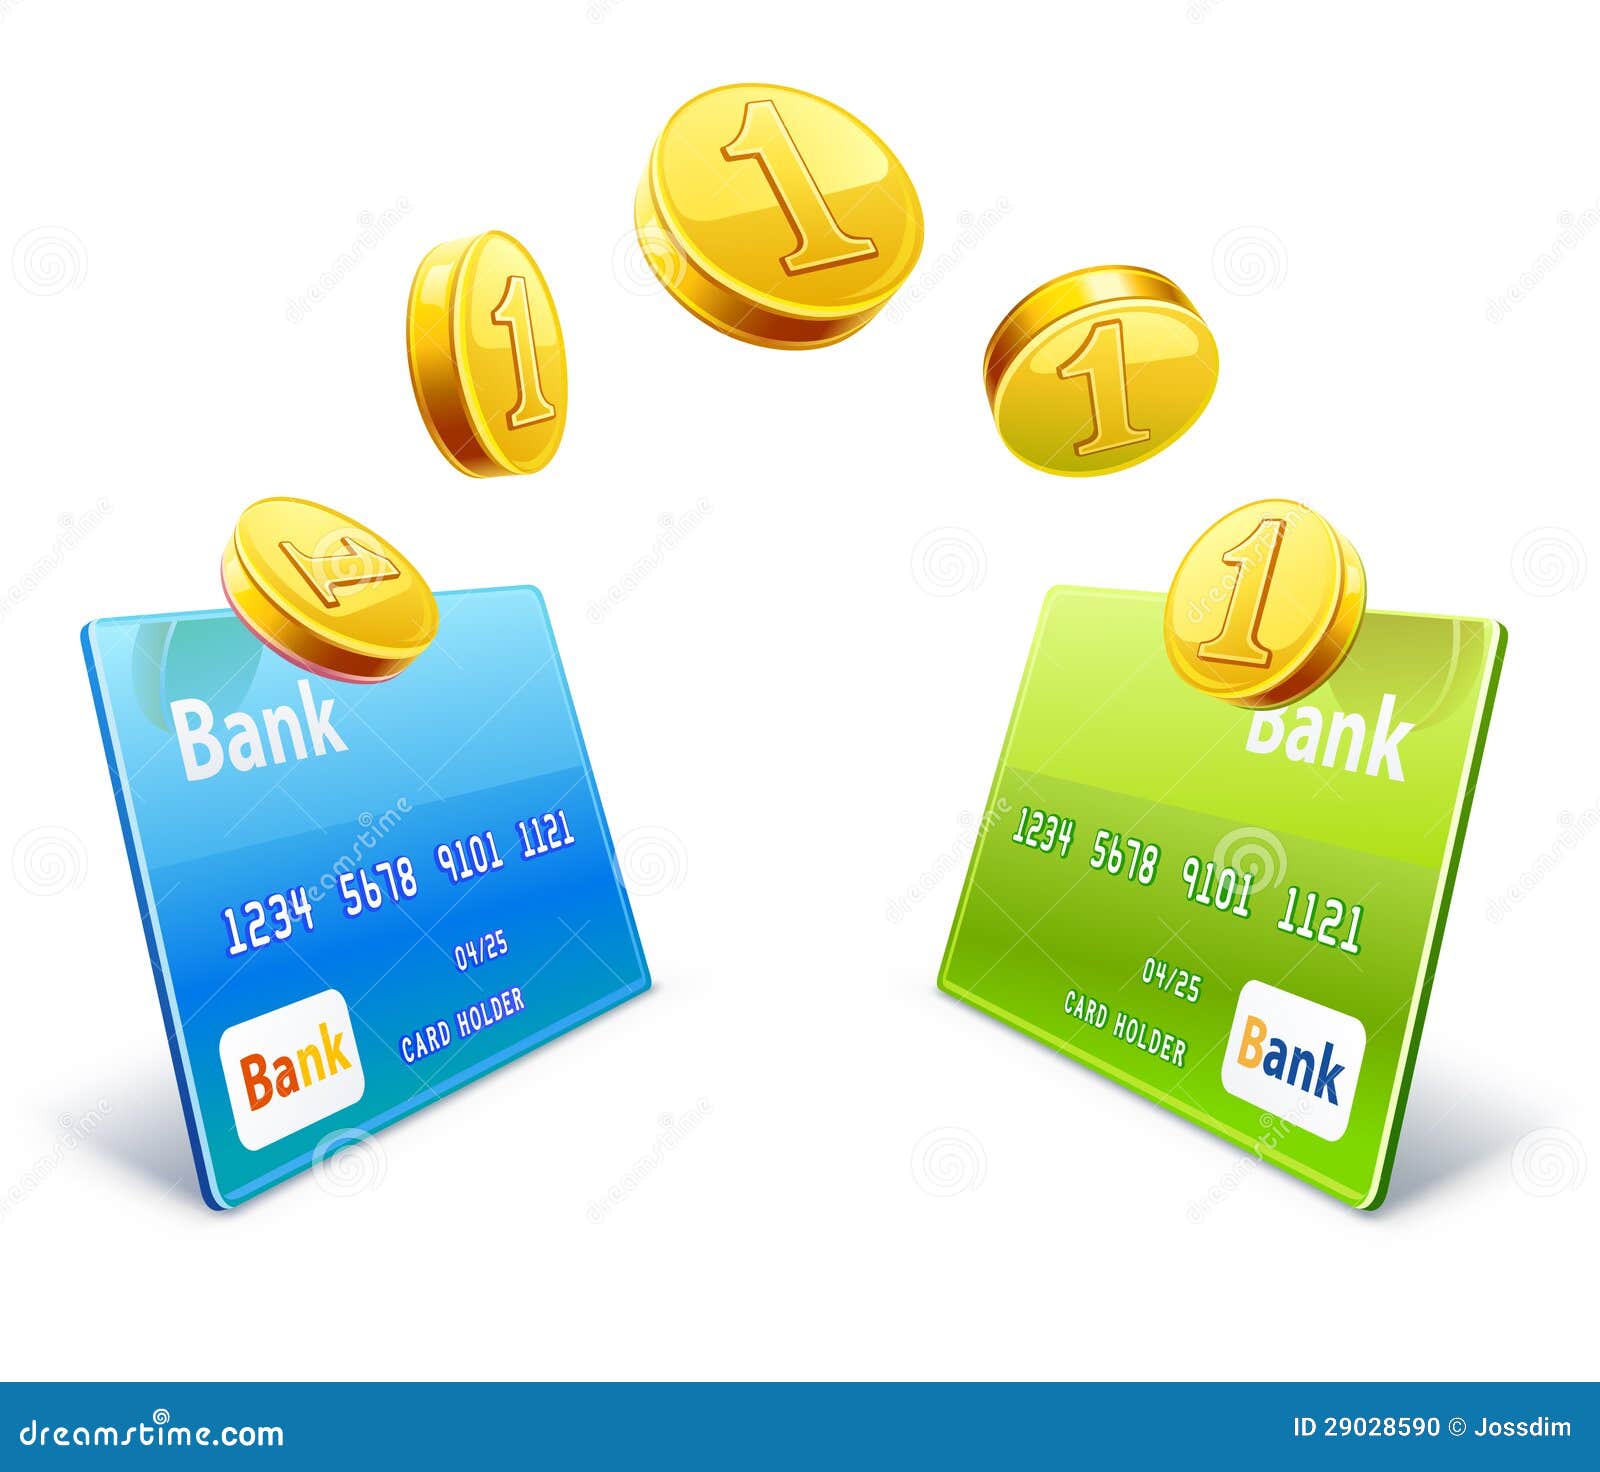 moving money clipart - photo #11